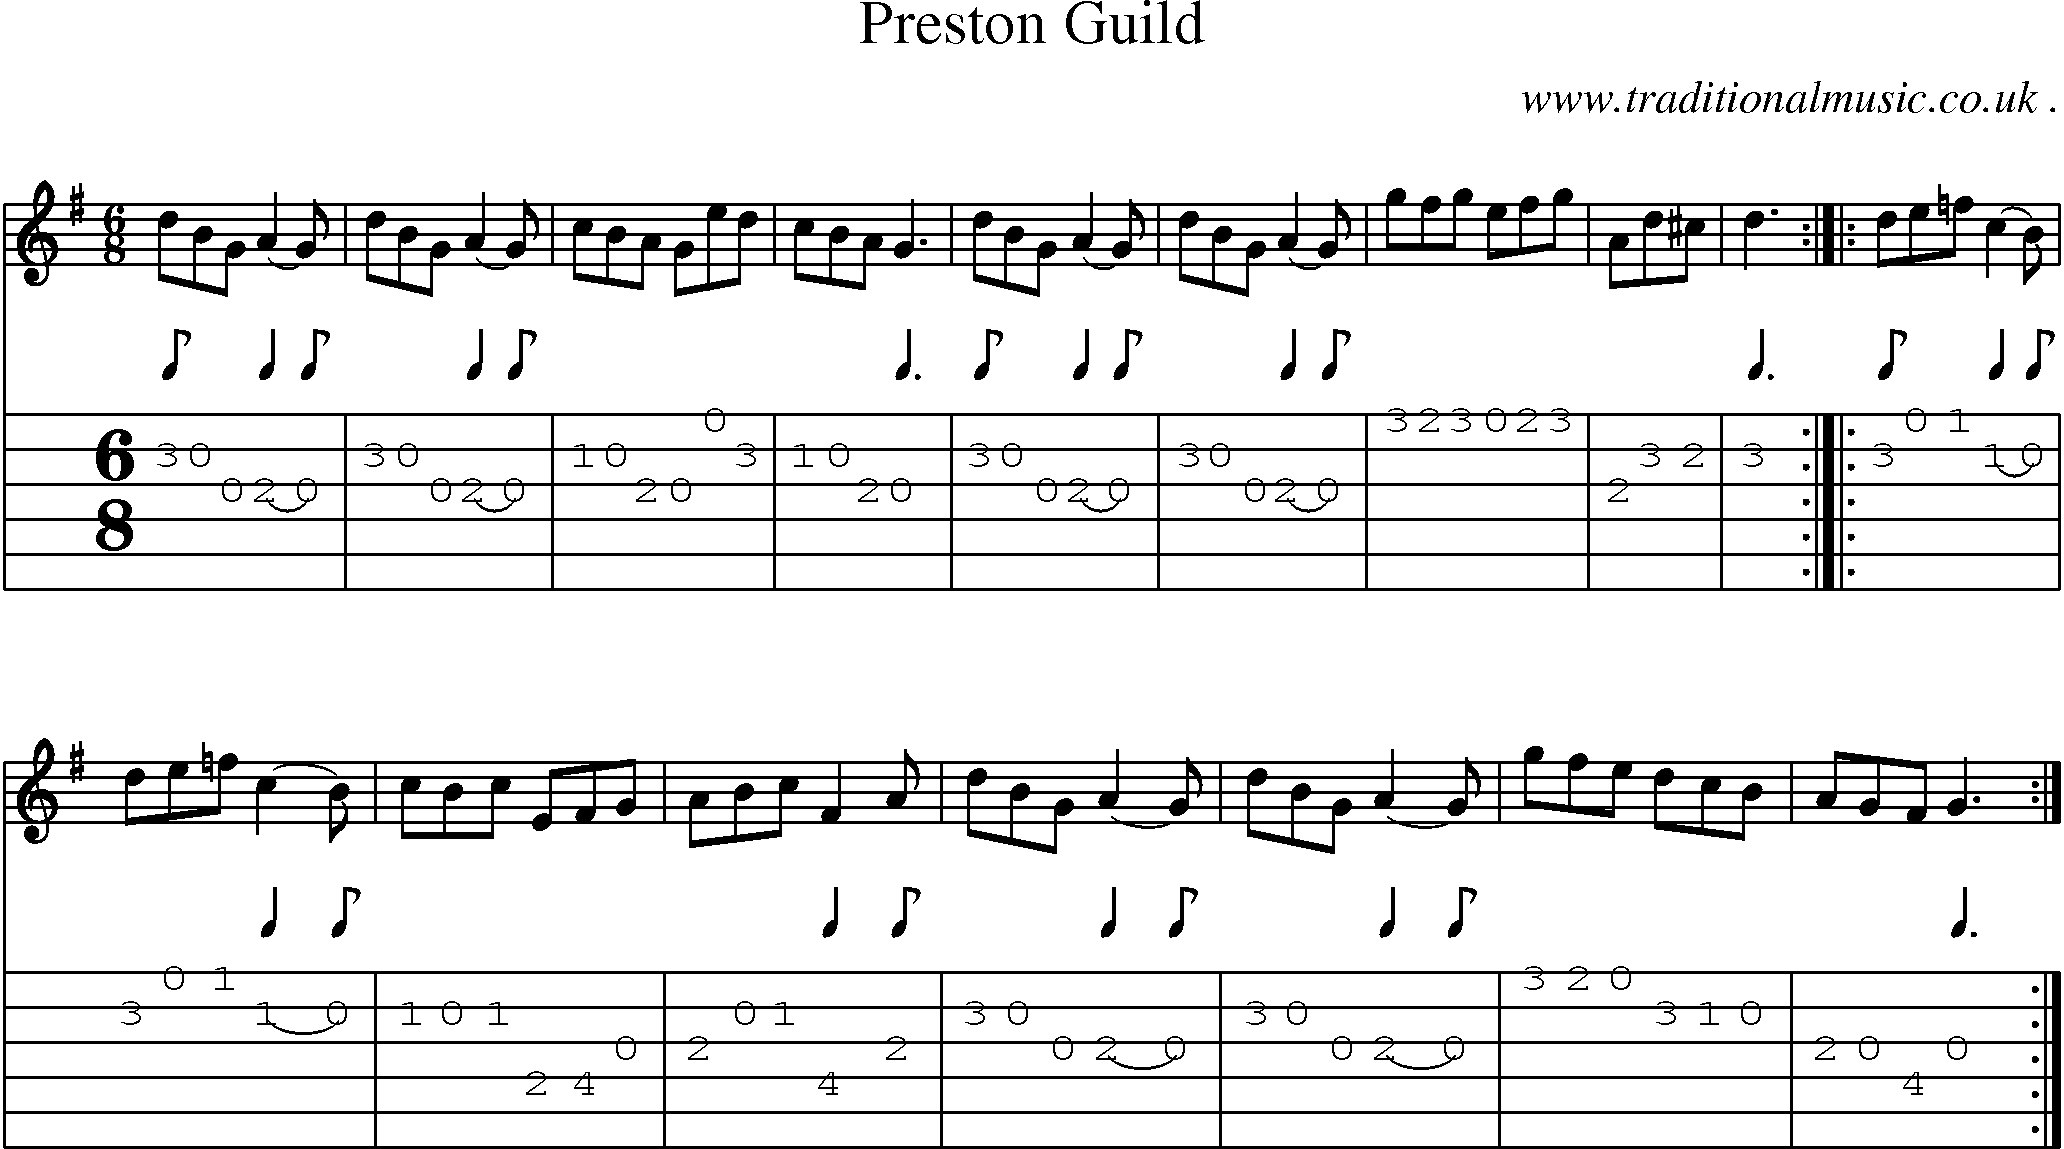 Sheet-Music and Guitar Tabs for Preston Guild